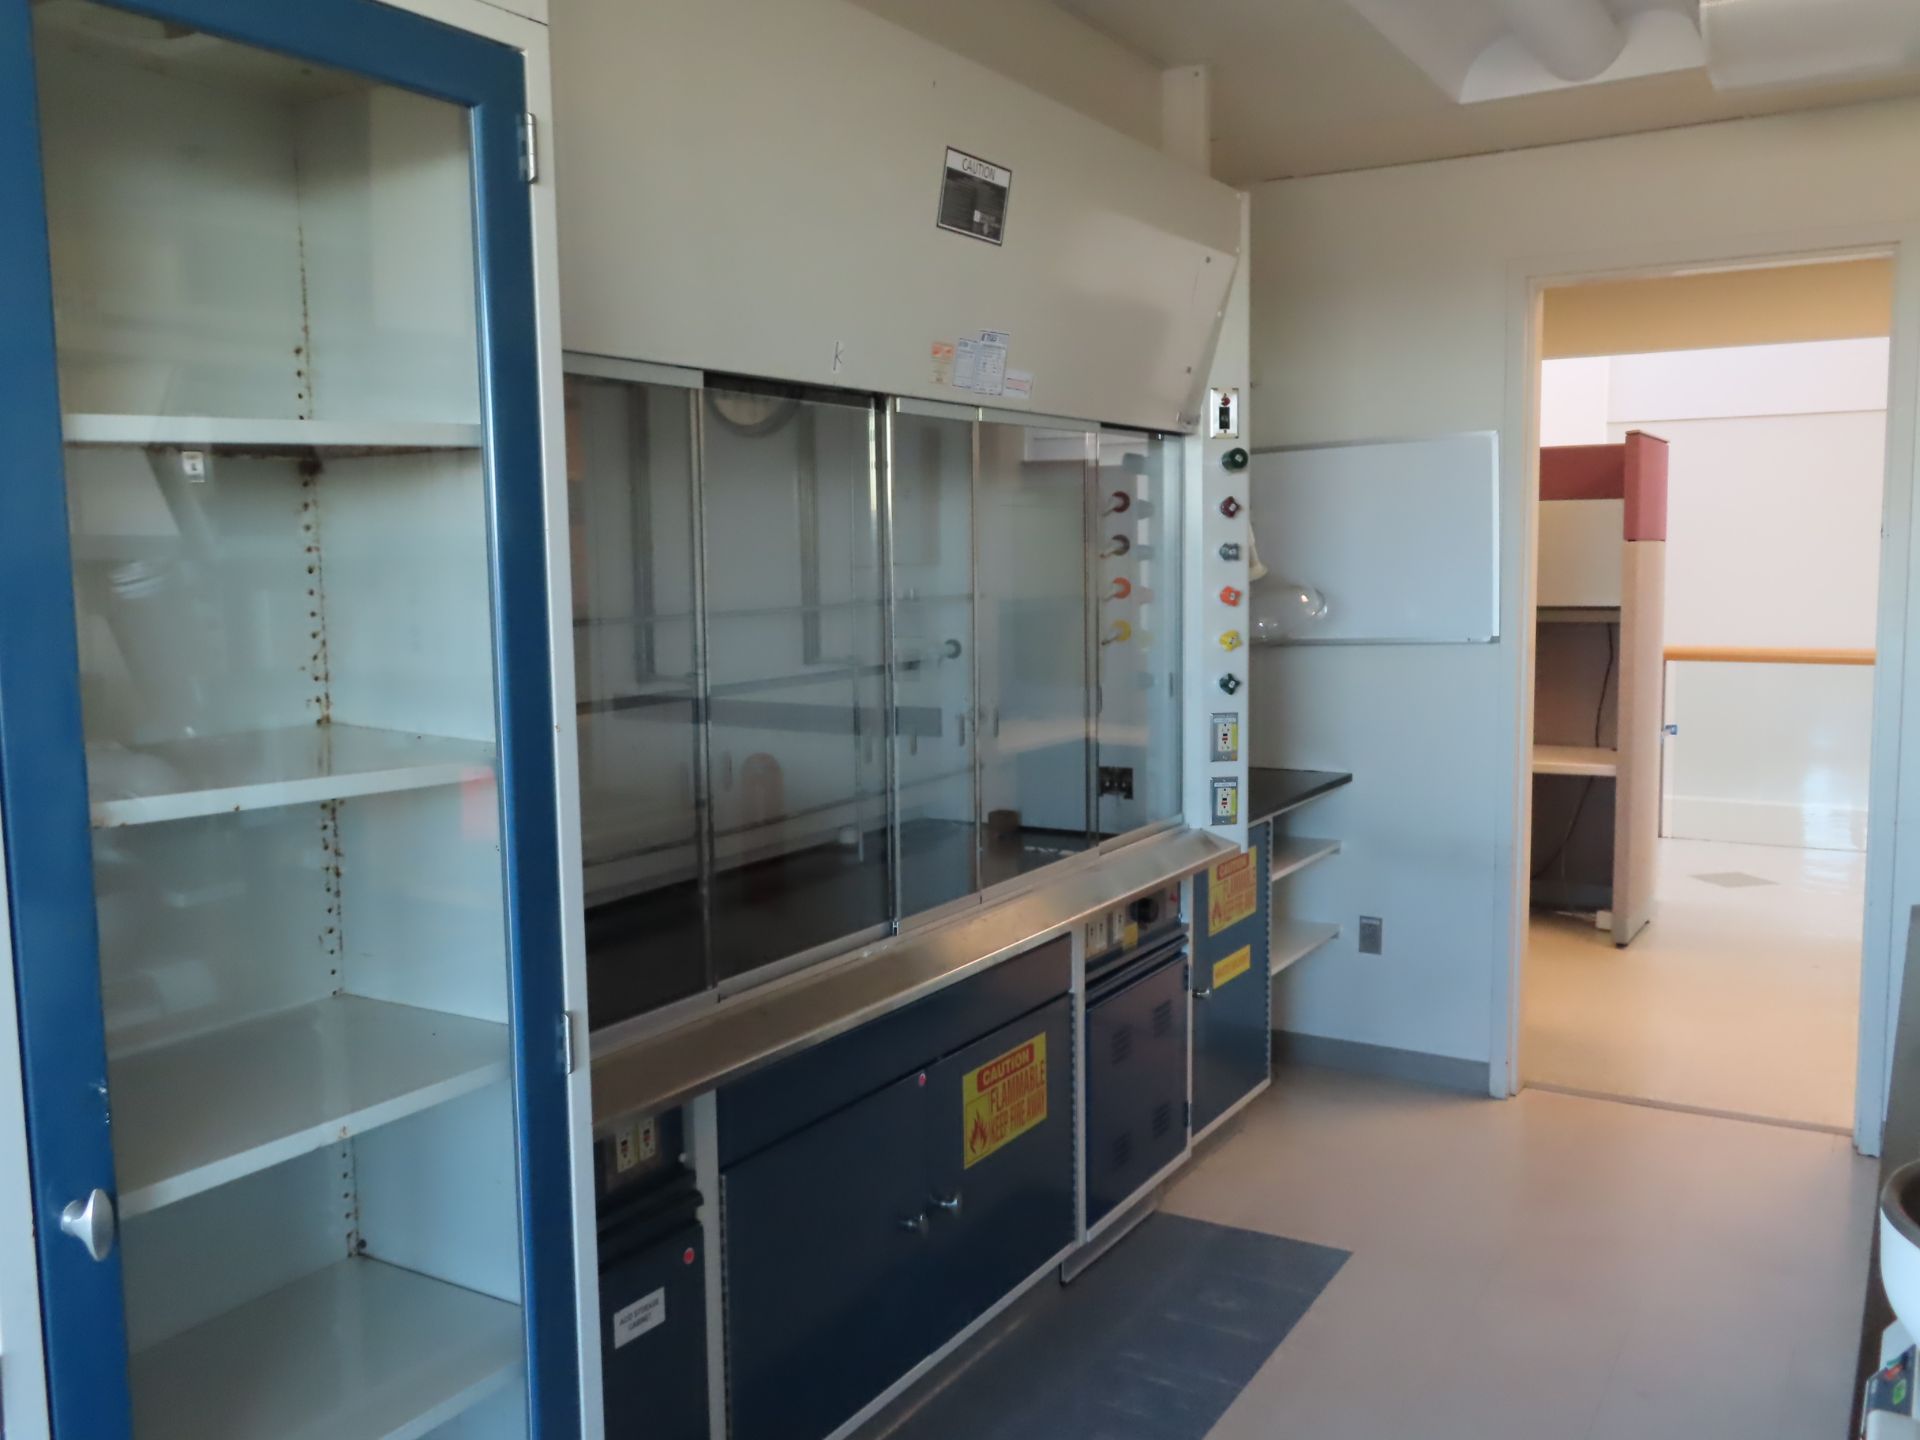 Lot of (2) Kewaunee FH fume hoods with base cabinets, 7'4" X 26", located in D Wing, 4th floor, room